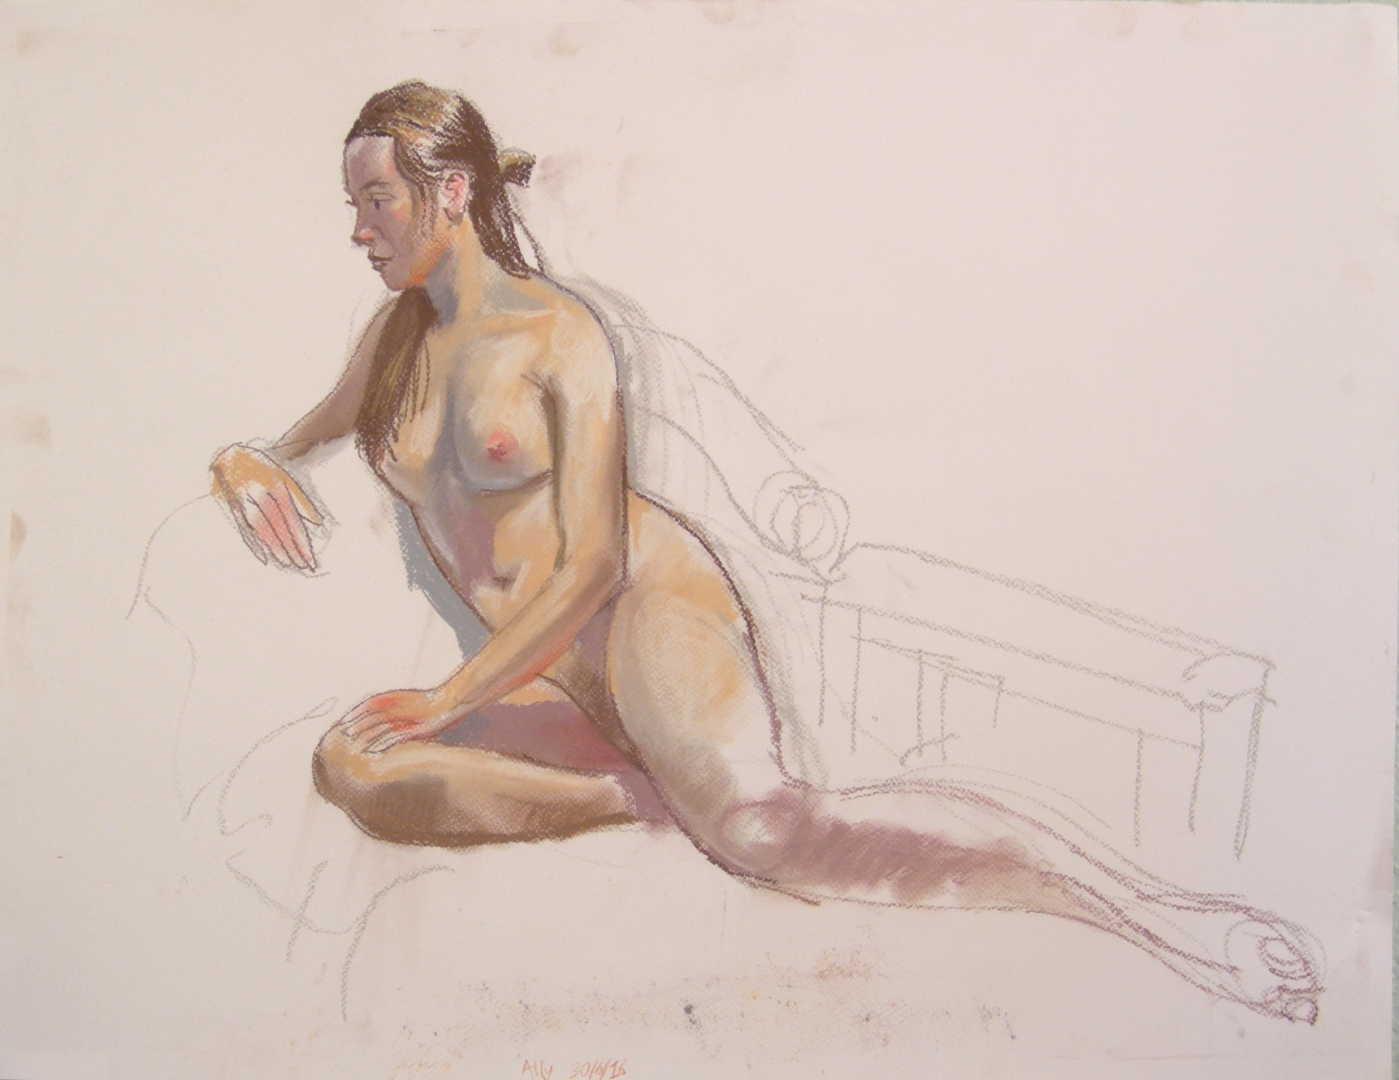 life drawing in pastels - 'Ally' 30-06-2016